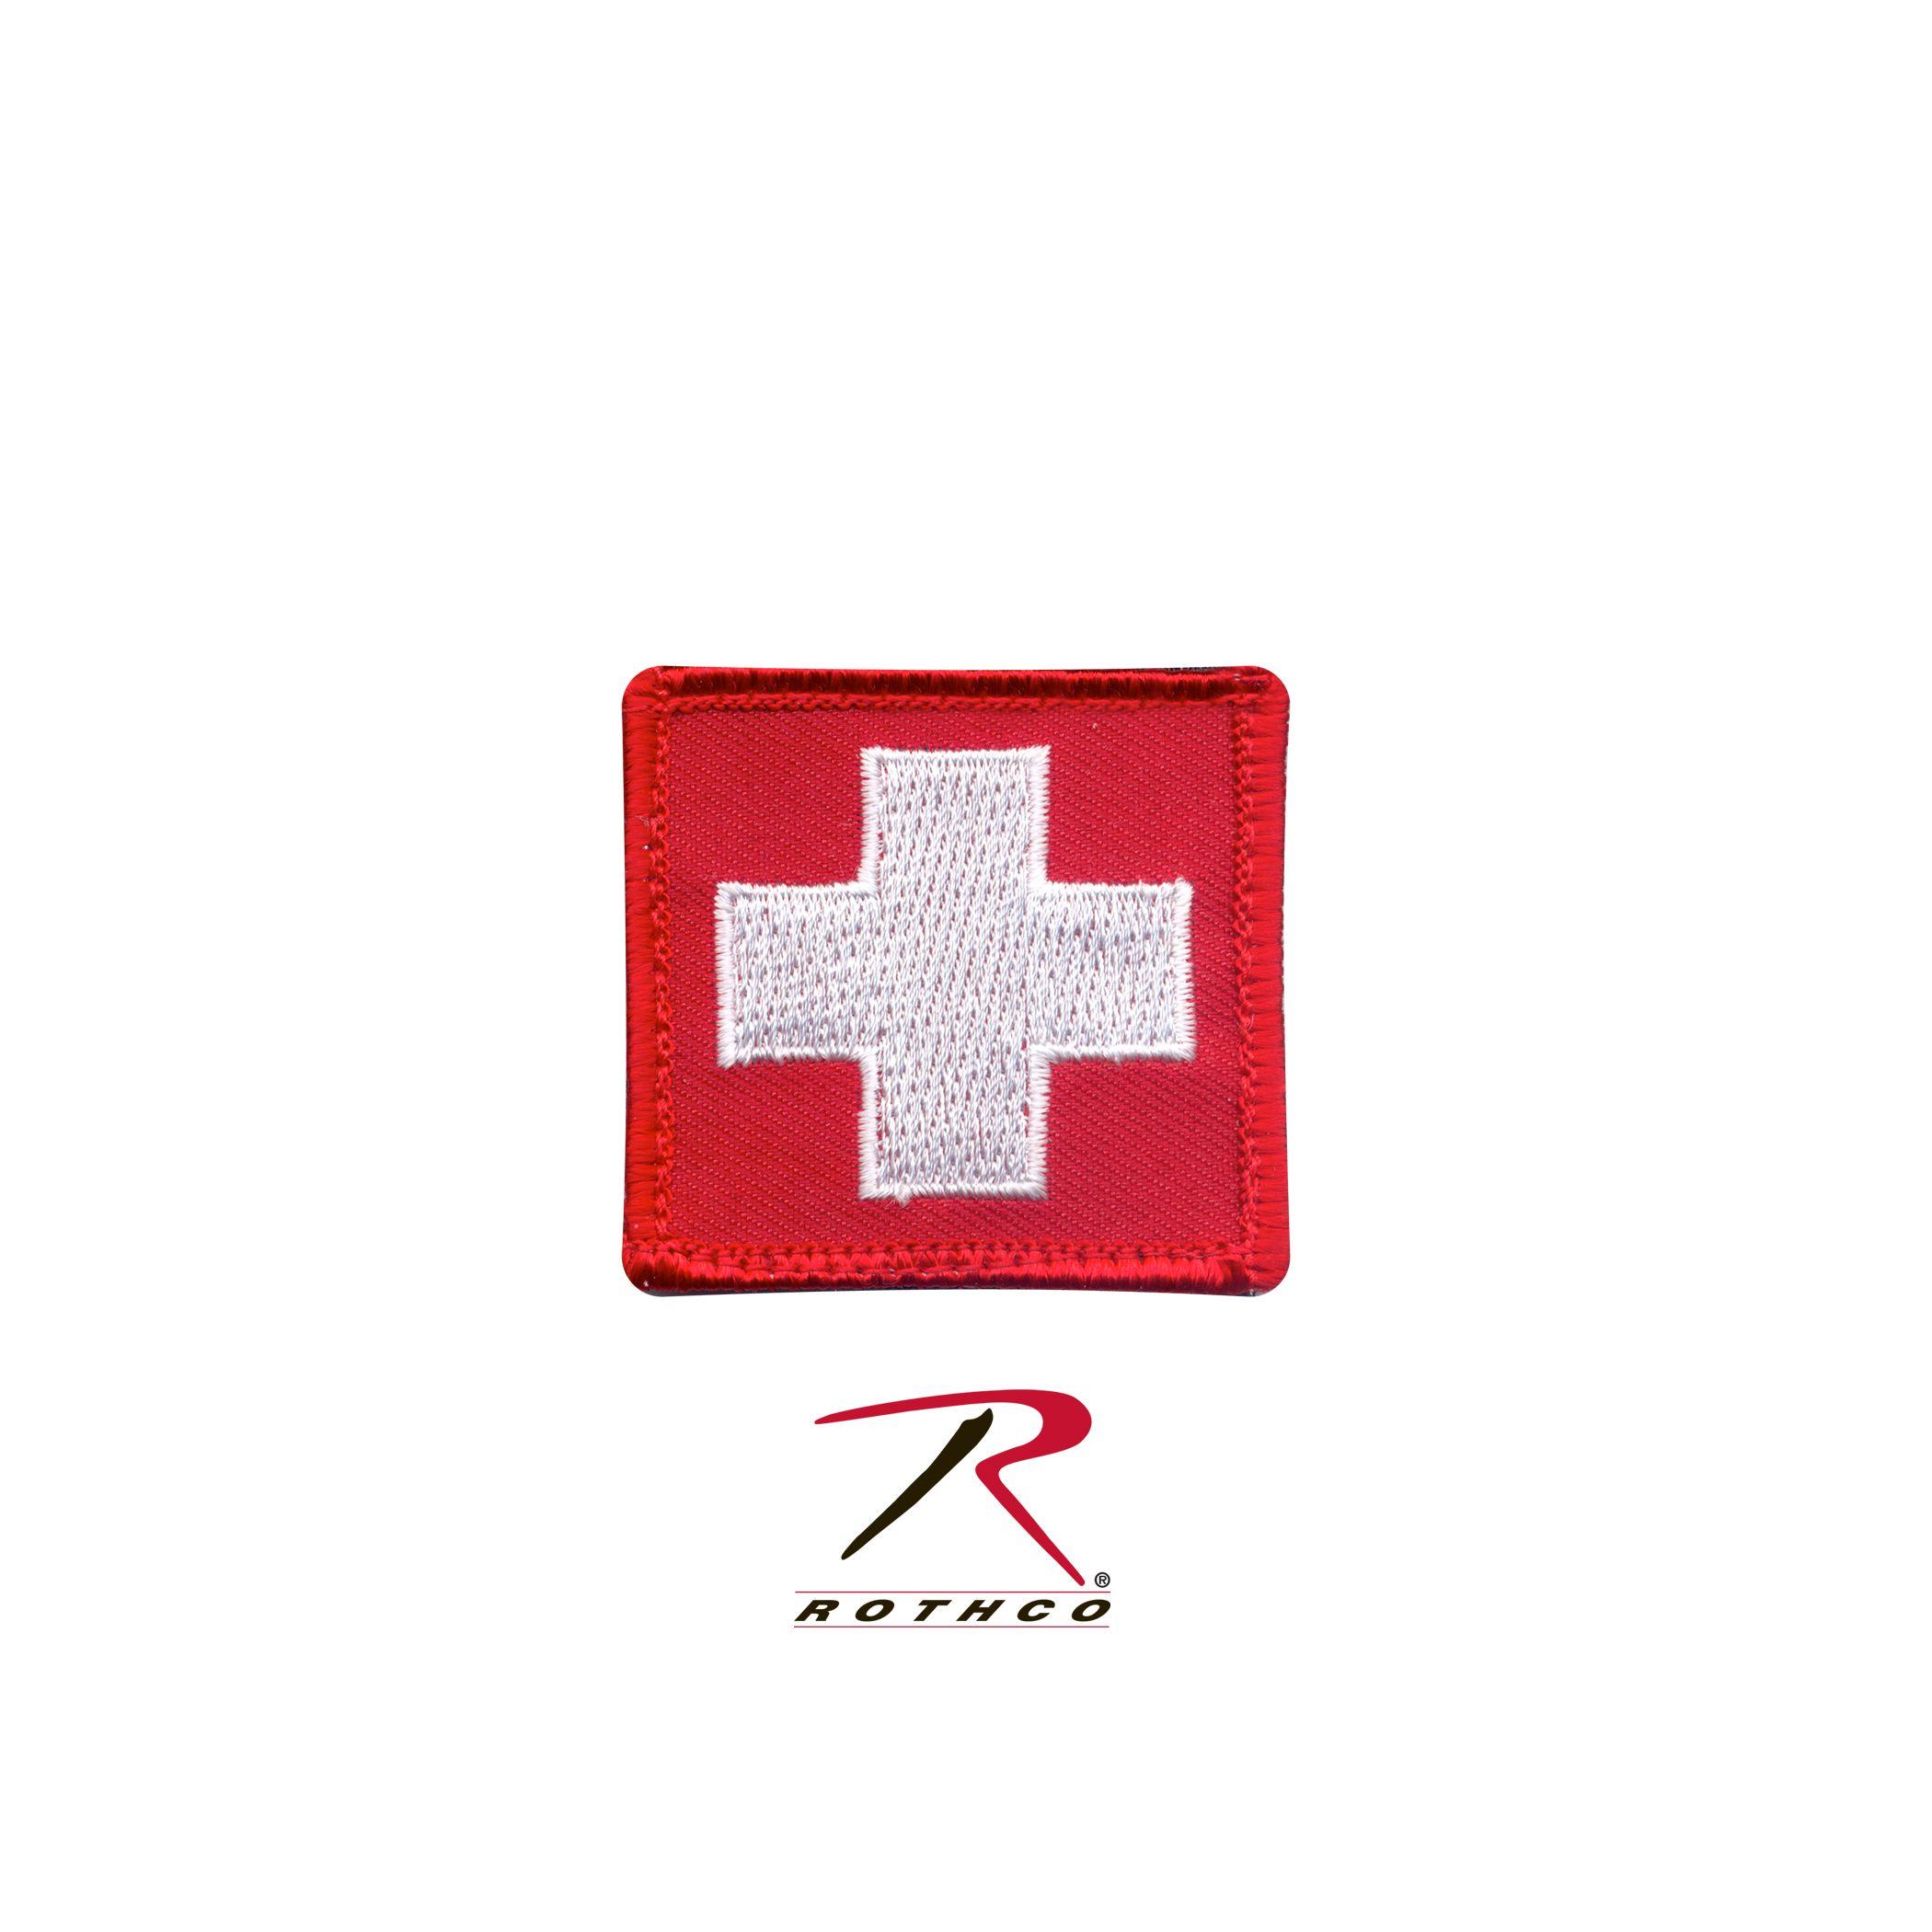 Red Box with White a Logo - Red square white cross Logos